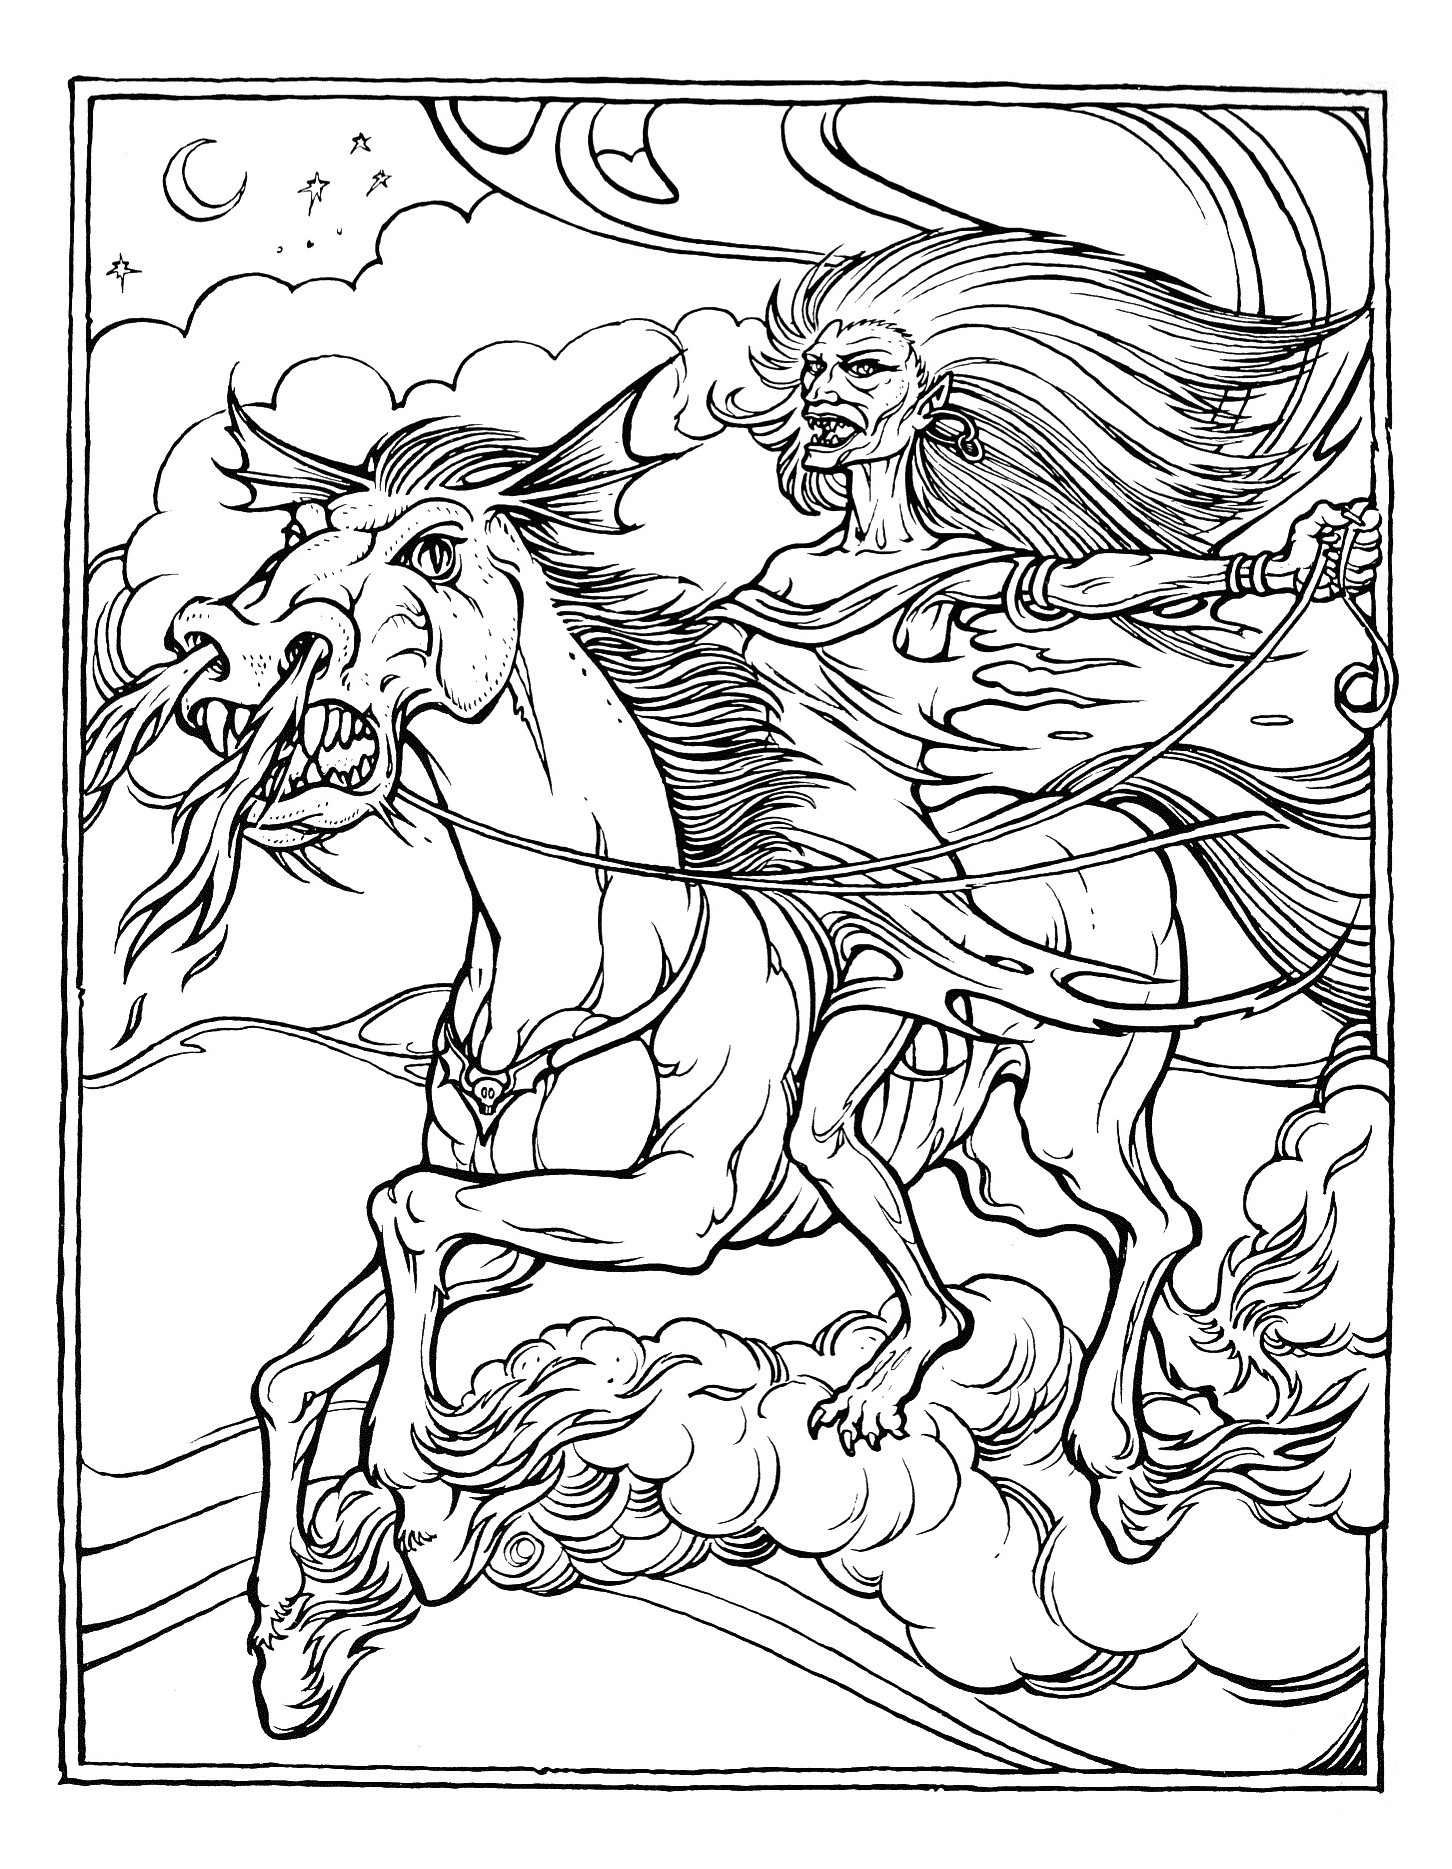 Dragon Coloring Books For Adults
 Dragon Coloring Pages